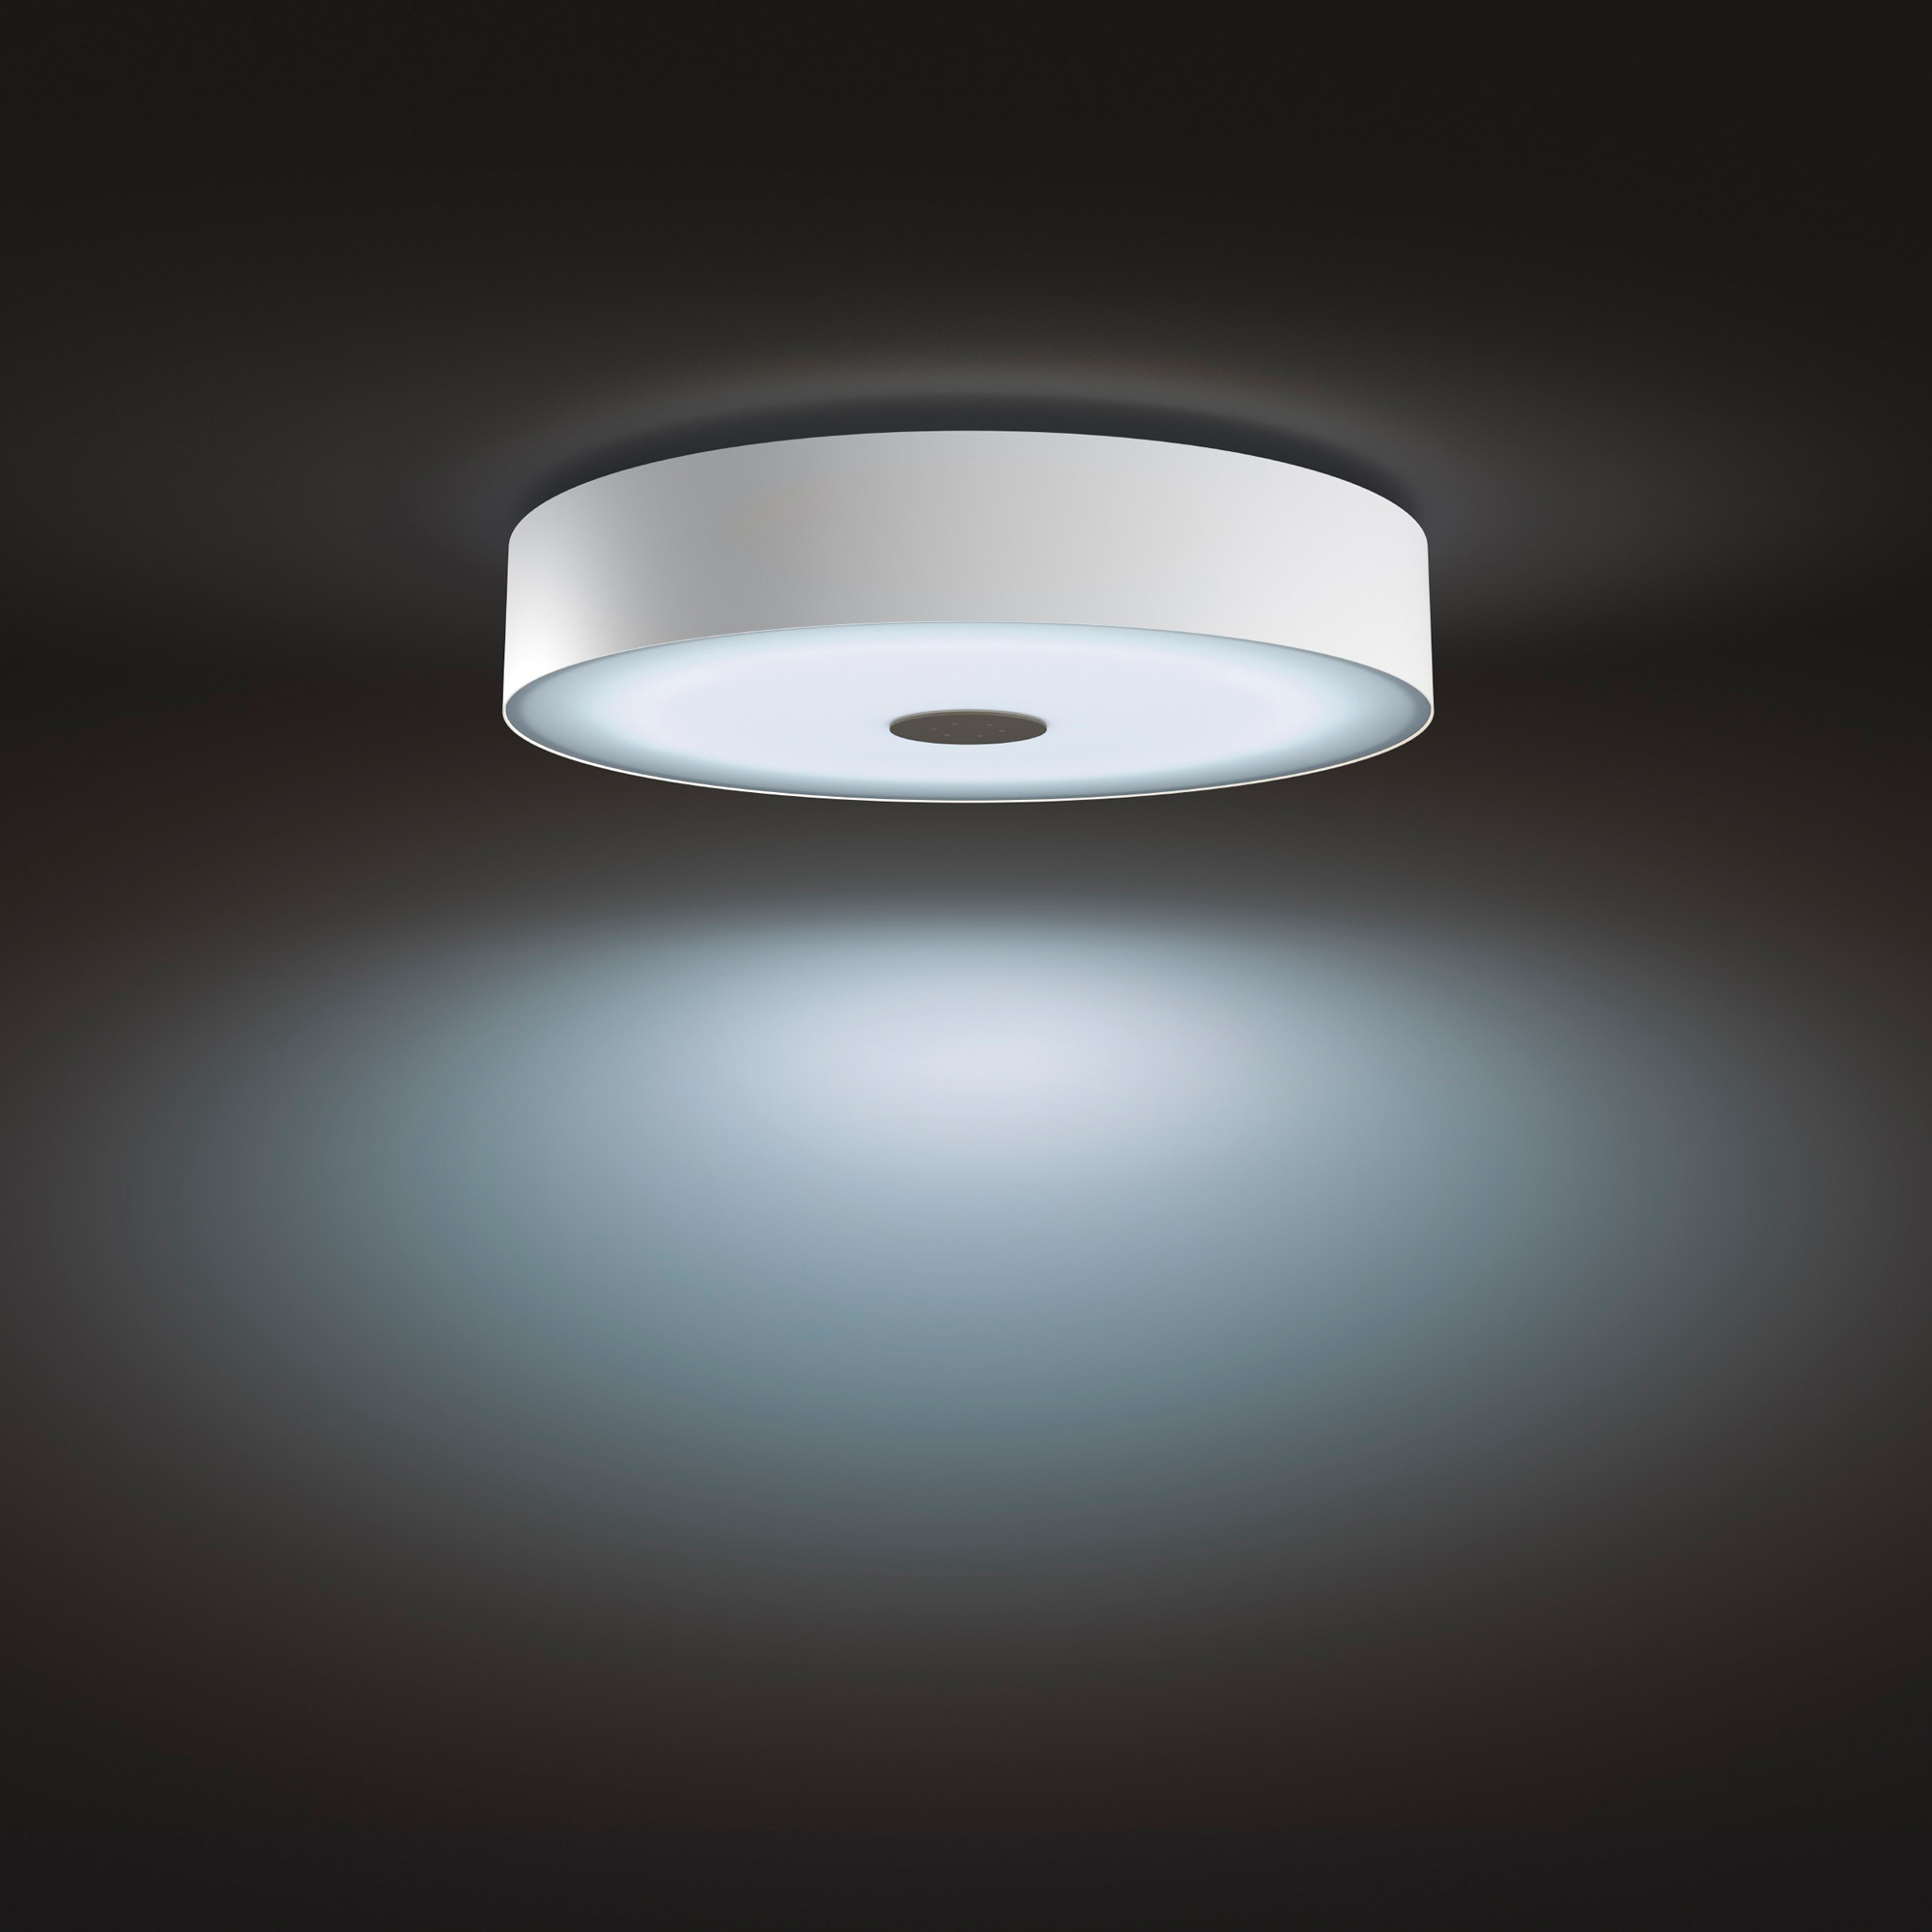 Philips Hue White Ambiance Fair LED Ceiling Light white 2900lm incl. Dimmer Switch